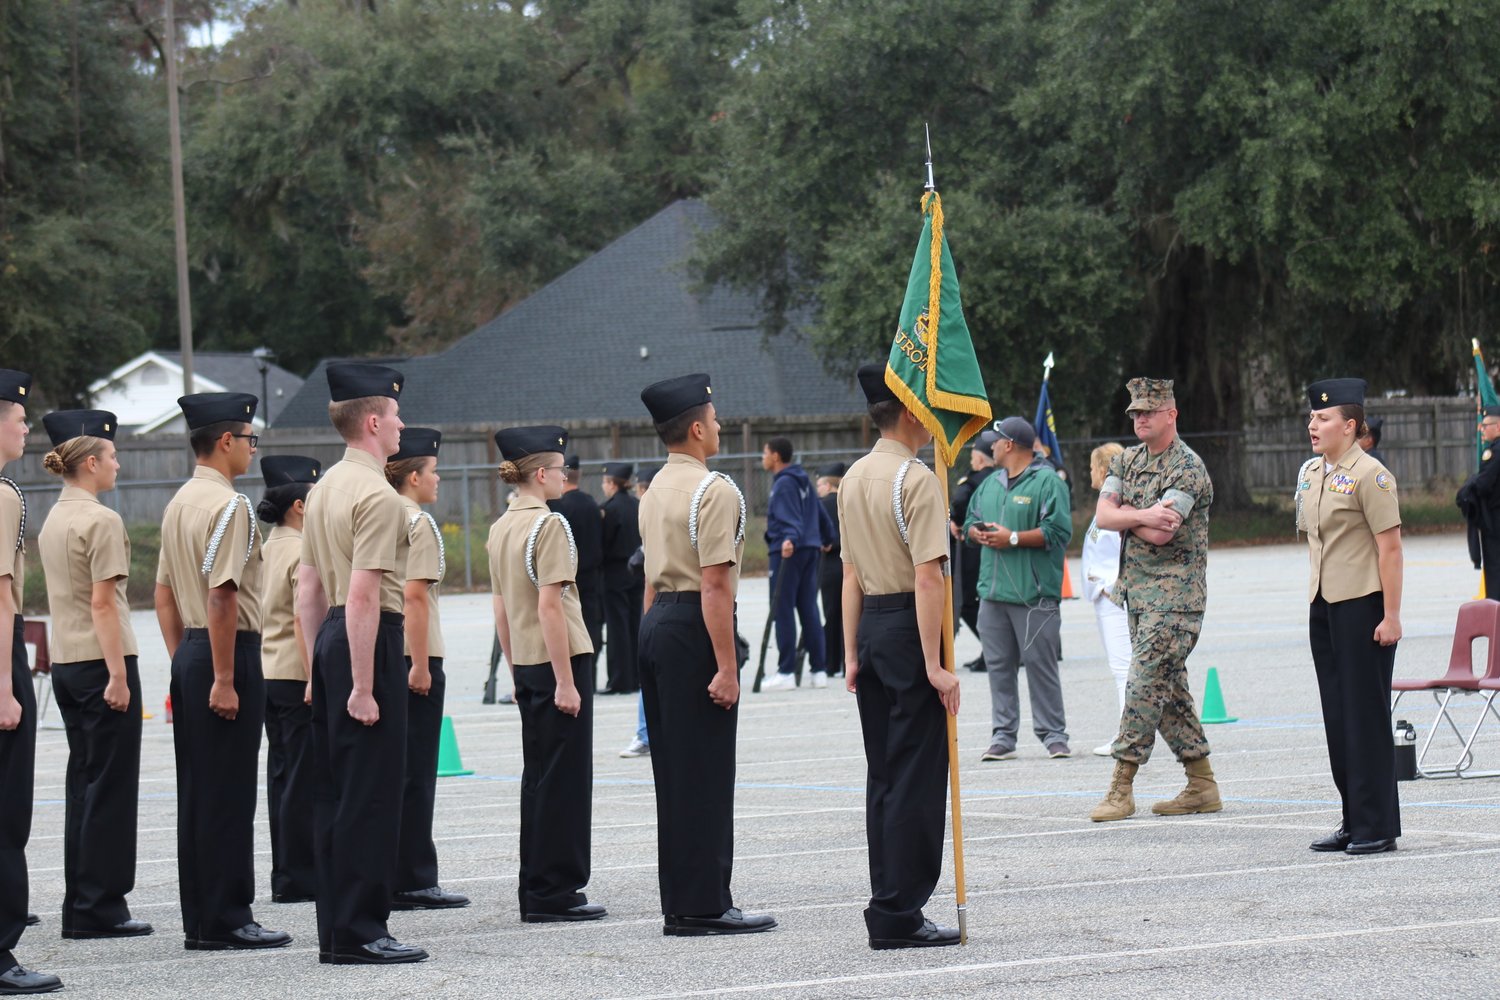 Commander Kaitlyn Boggs leads the Nease unarmed basic team to first place at the Lee County drill meet on Oct. 30 in Leesburg, GA.